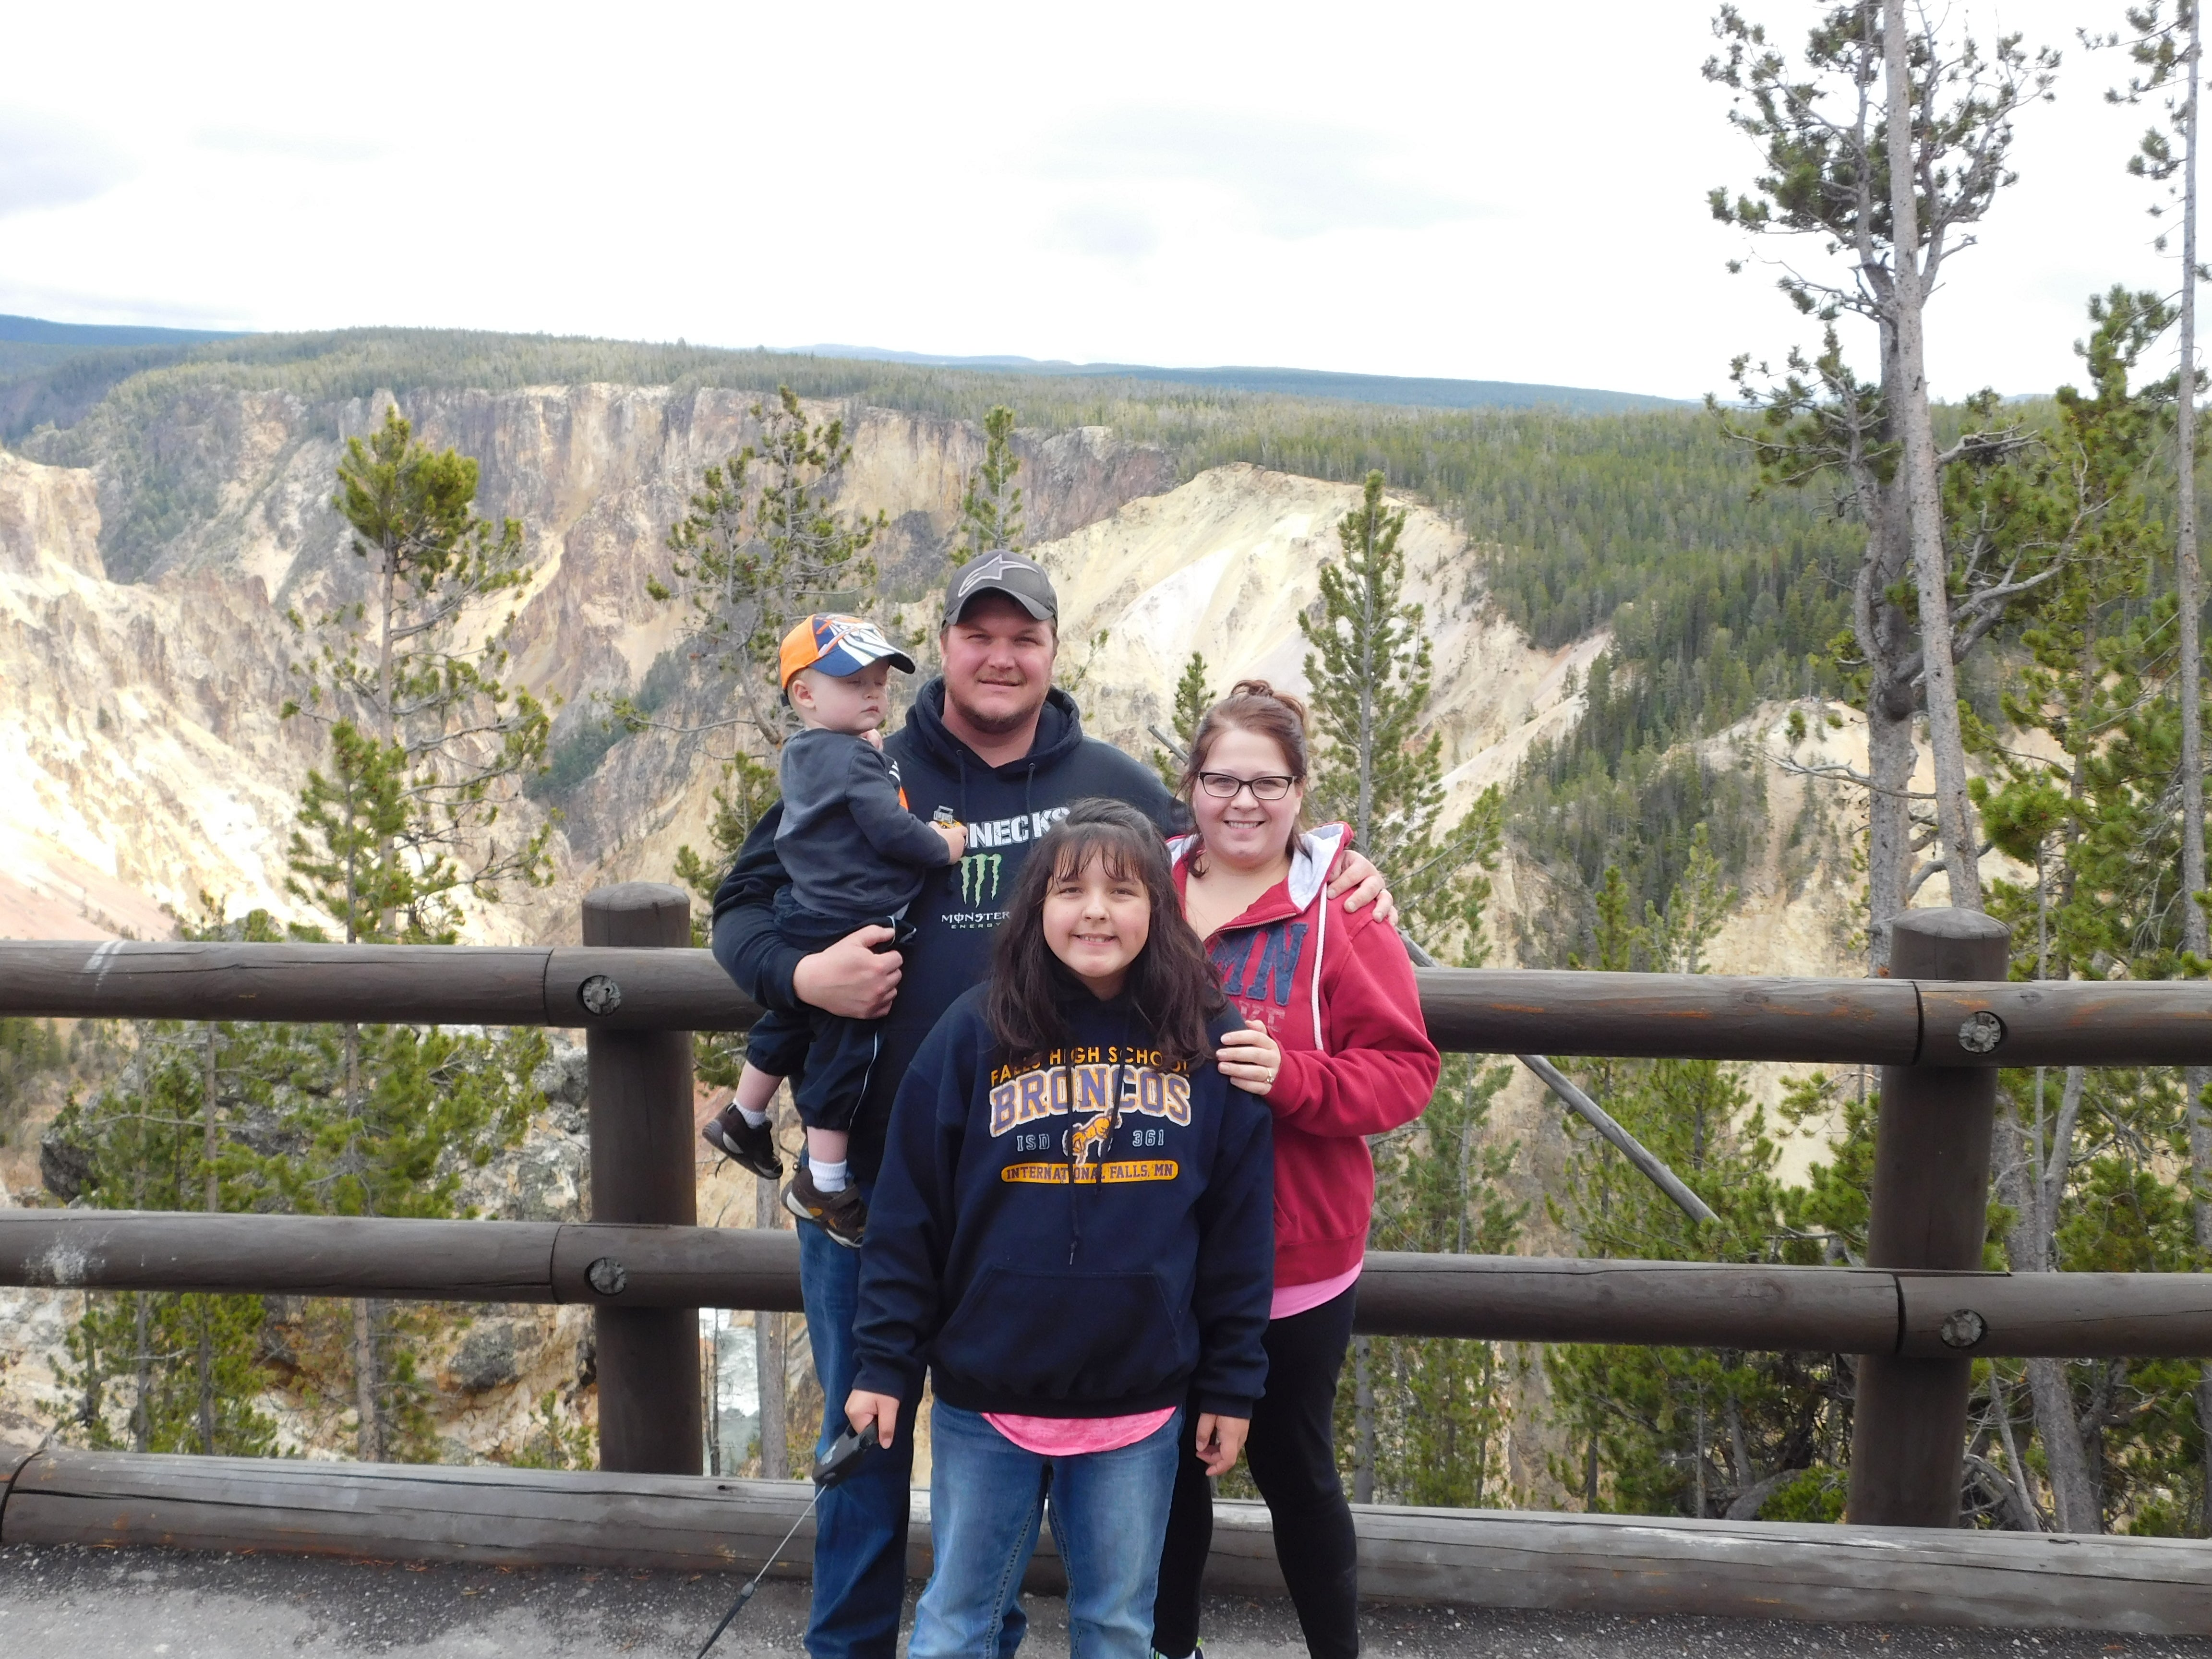 Camper submitted image from Yellowstone Grizzly RV Park and Resort - 4